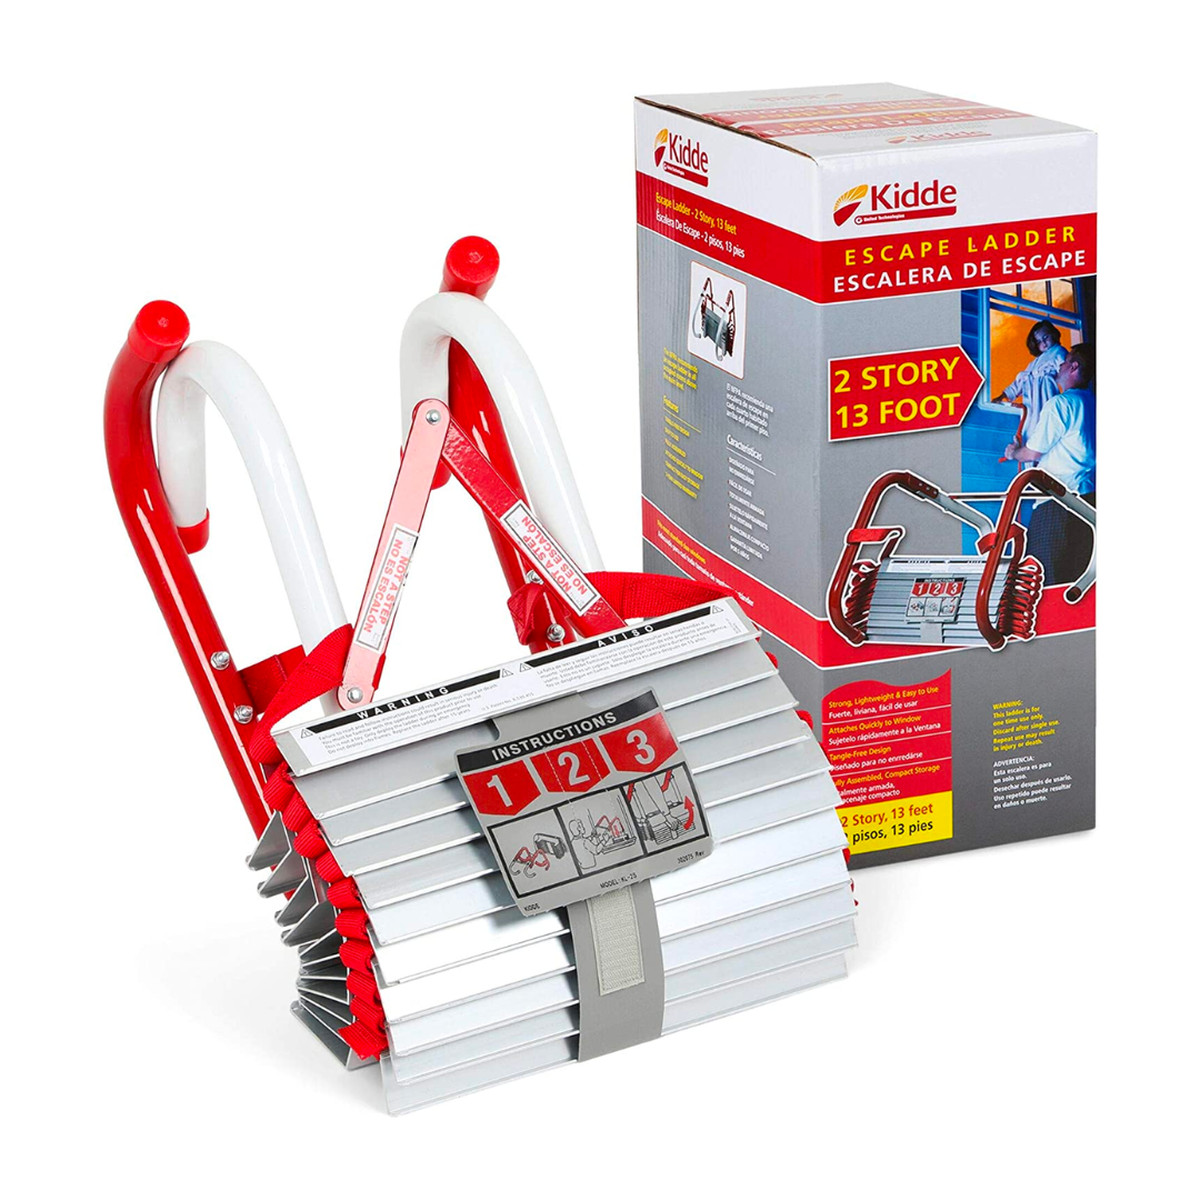 Kidde fire escape ladder for two stories with product packaging